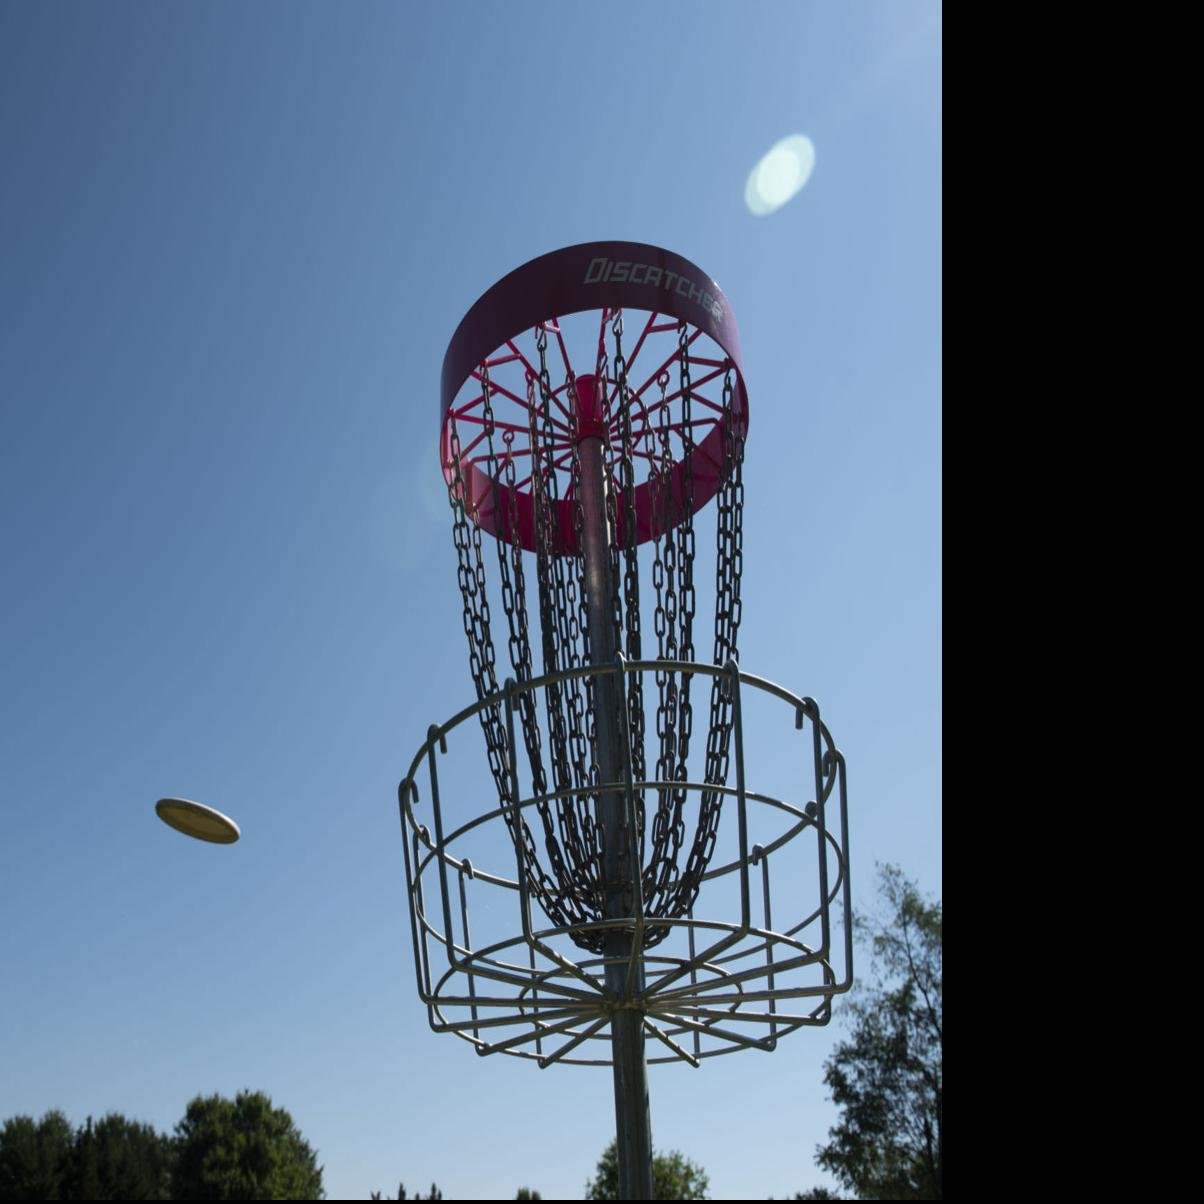 Same fairway, different game: Disc golf coming to shuttered golf